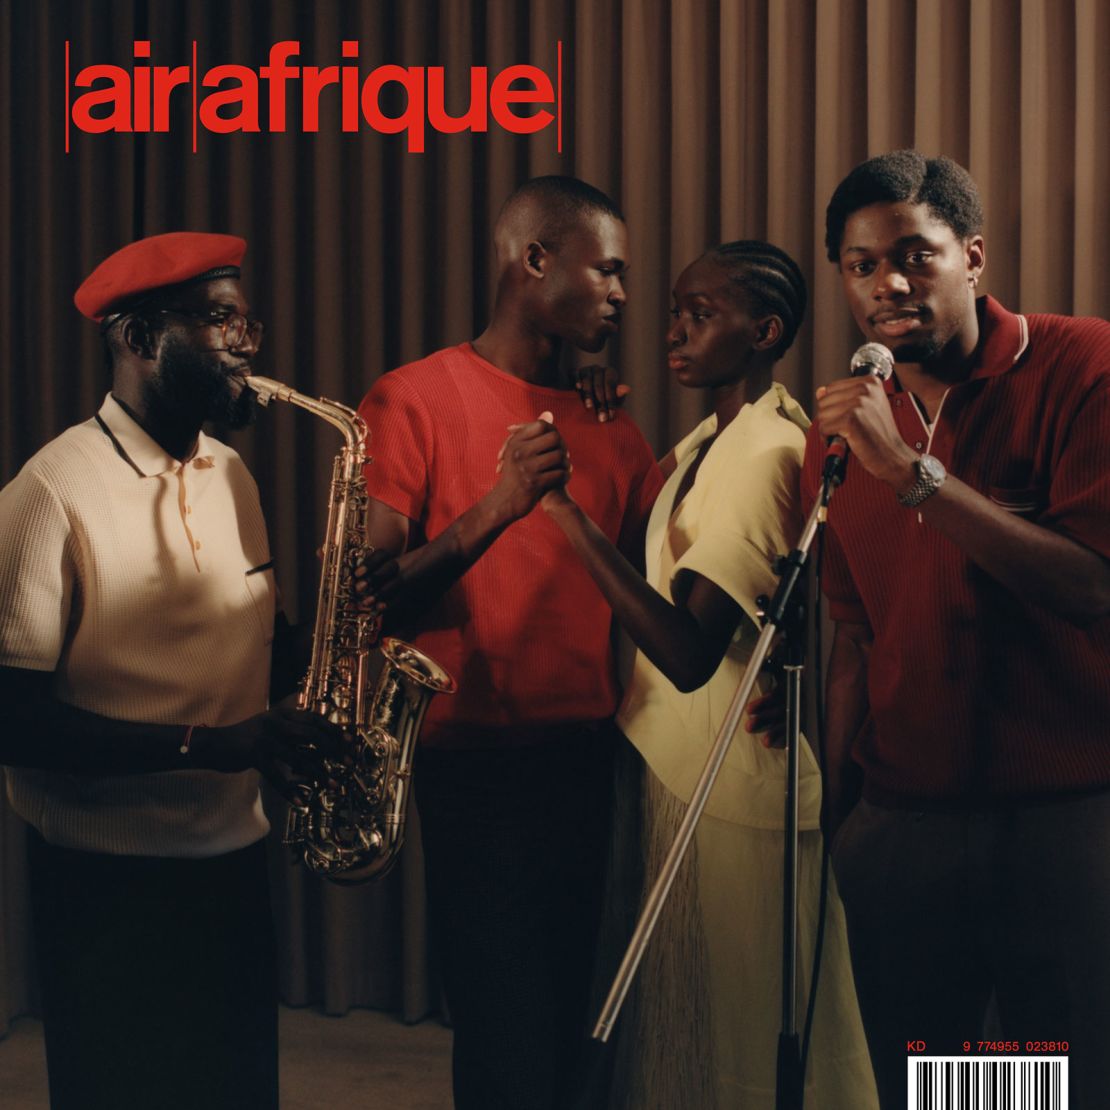 The cover of Air Afrique magazine's first issue, featuring the French rapper Tiakola.